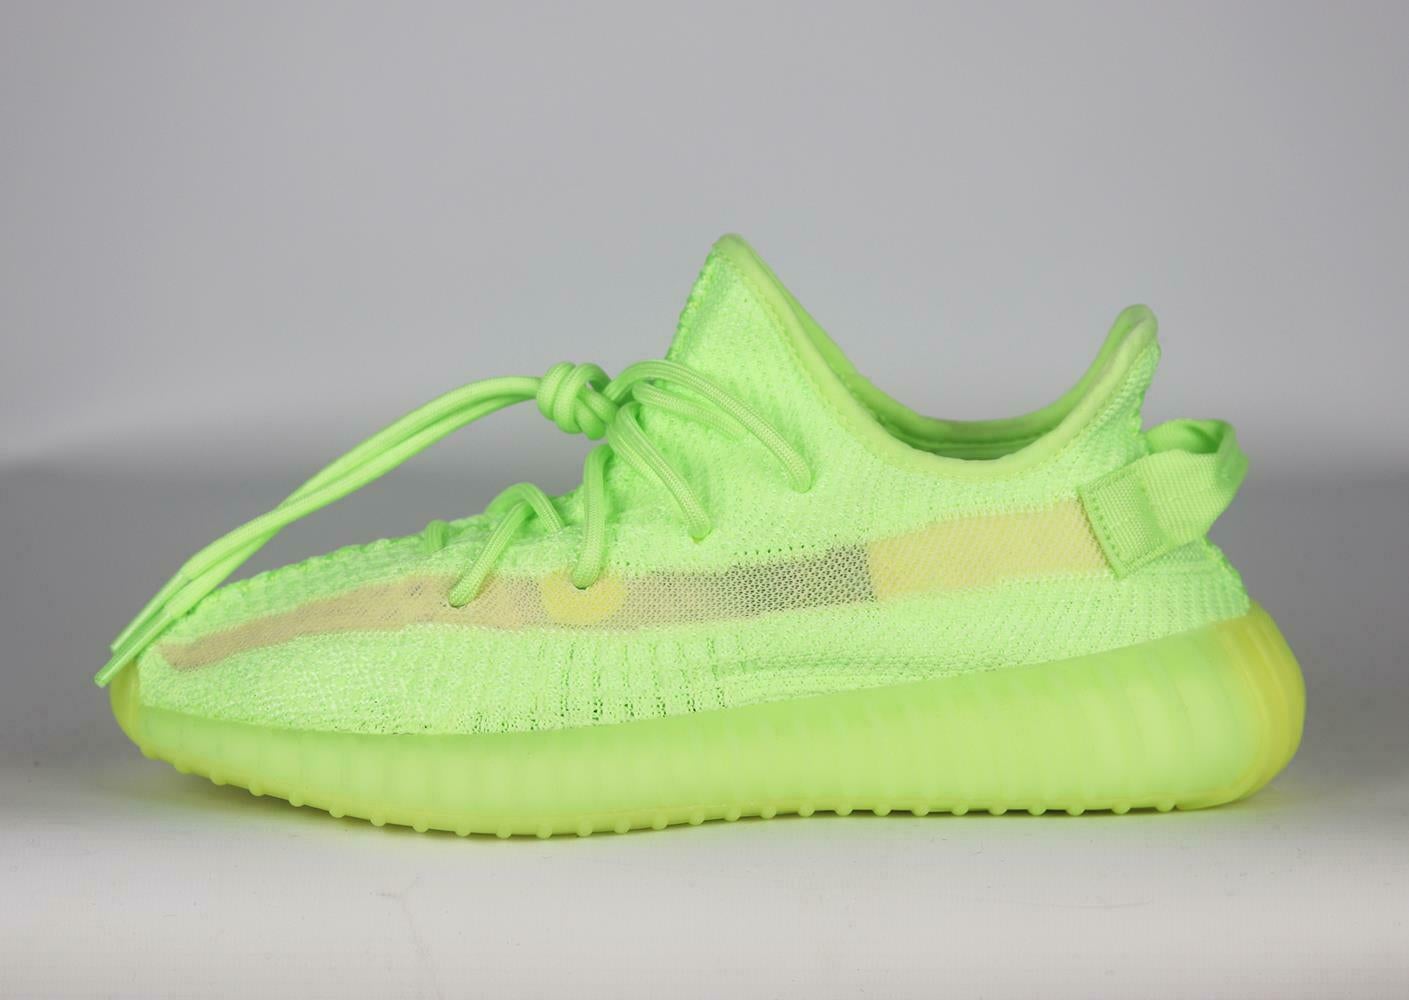 With the track record of adidas Originals and Kanye West's past sell-out styles, you maywant to read this quite quickly, these 'Yeezy Boost 350 V2' sneakers are the latest iteration of the coveted design, made from the label's soft Primeknit in